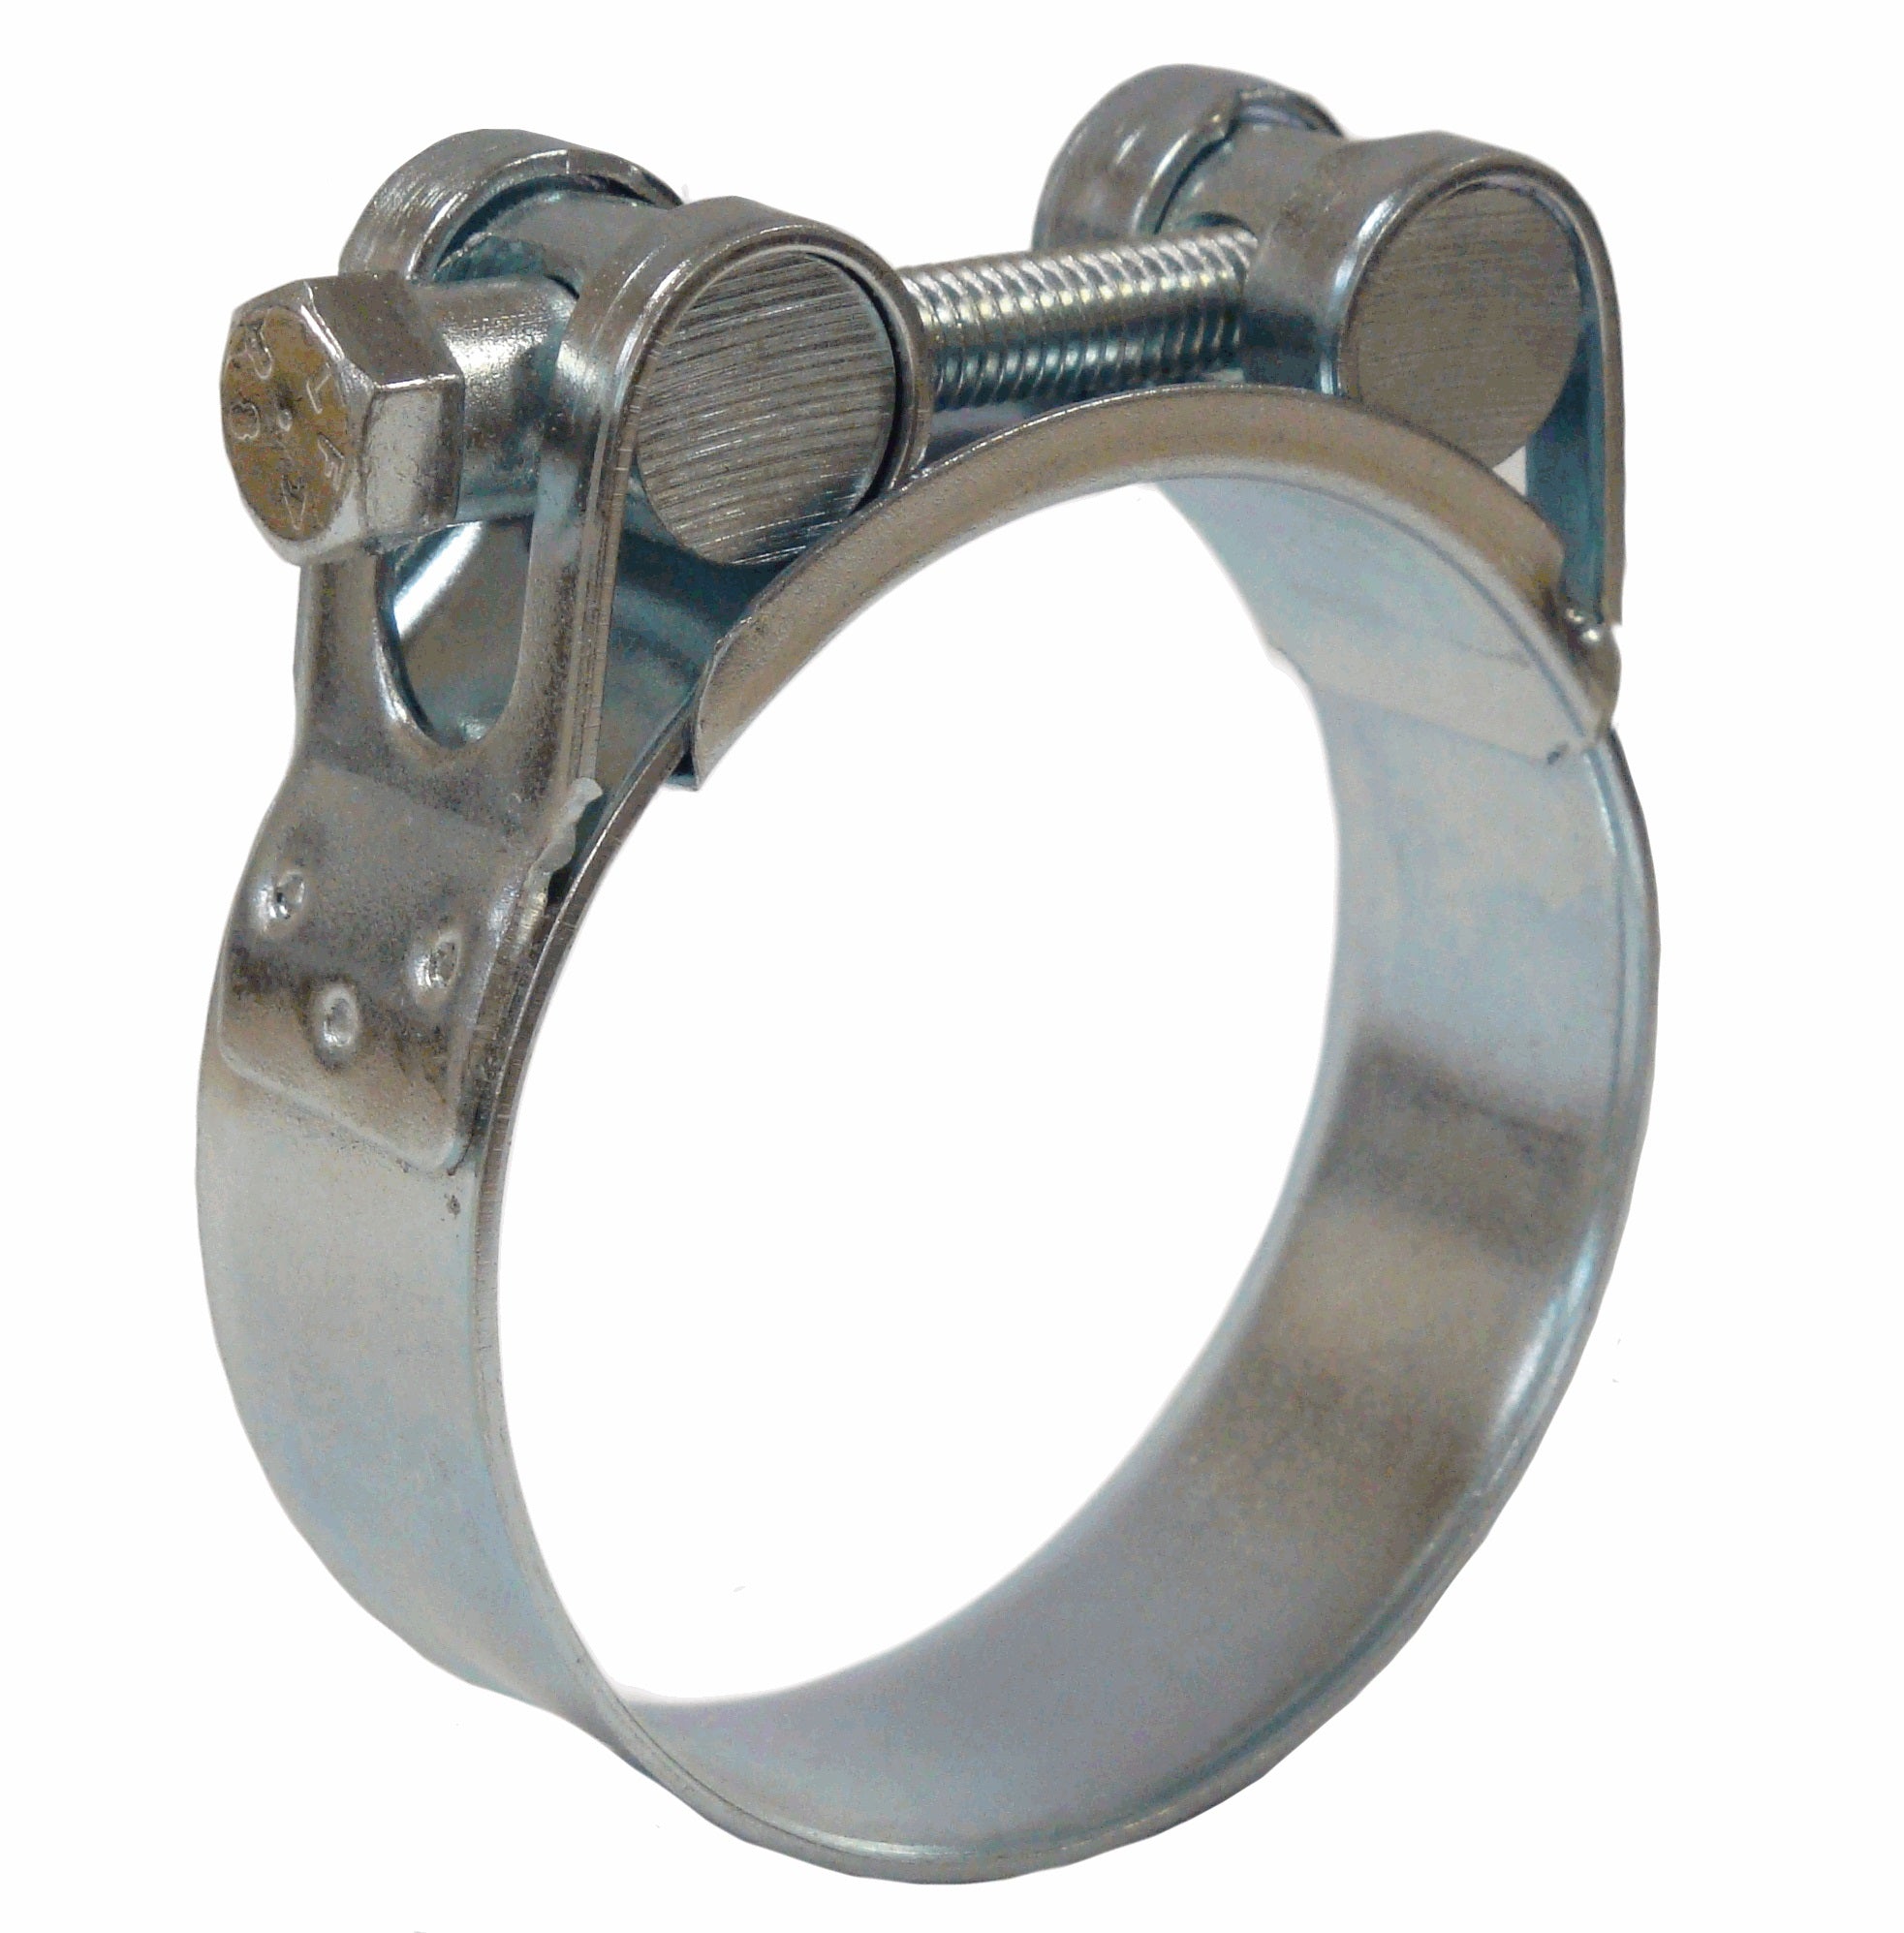 Jubilee® Superclamp 17-19mm 316 Stainless Steel